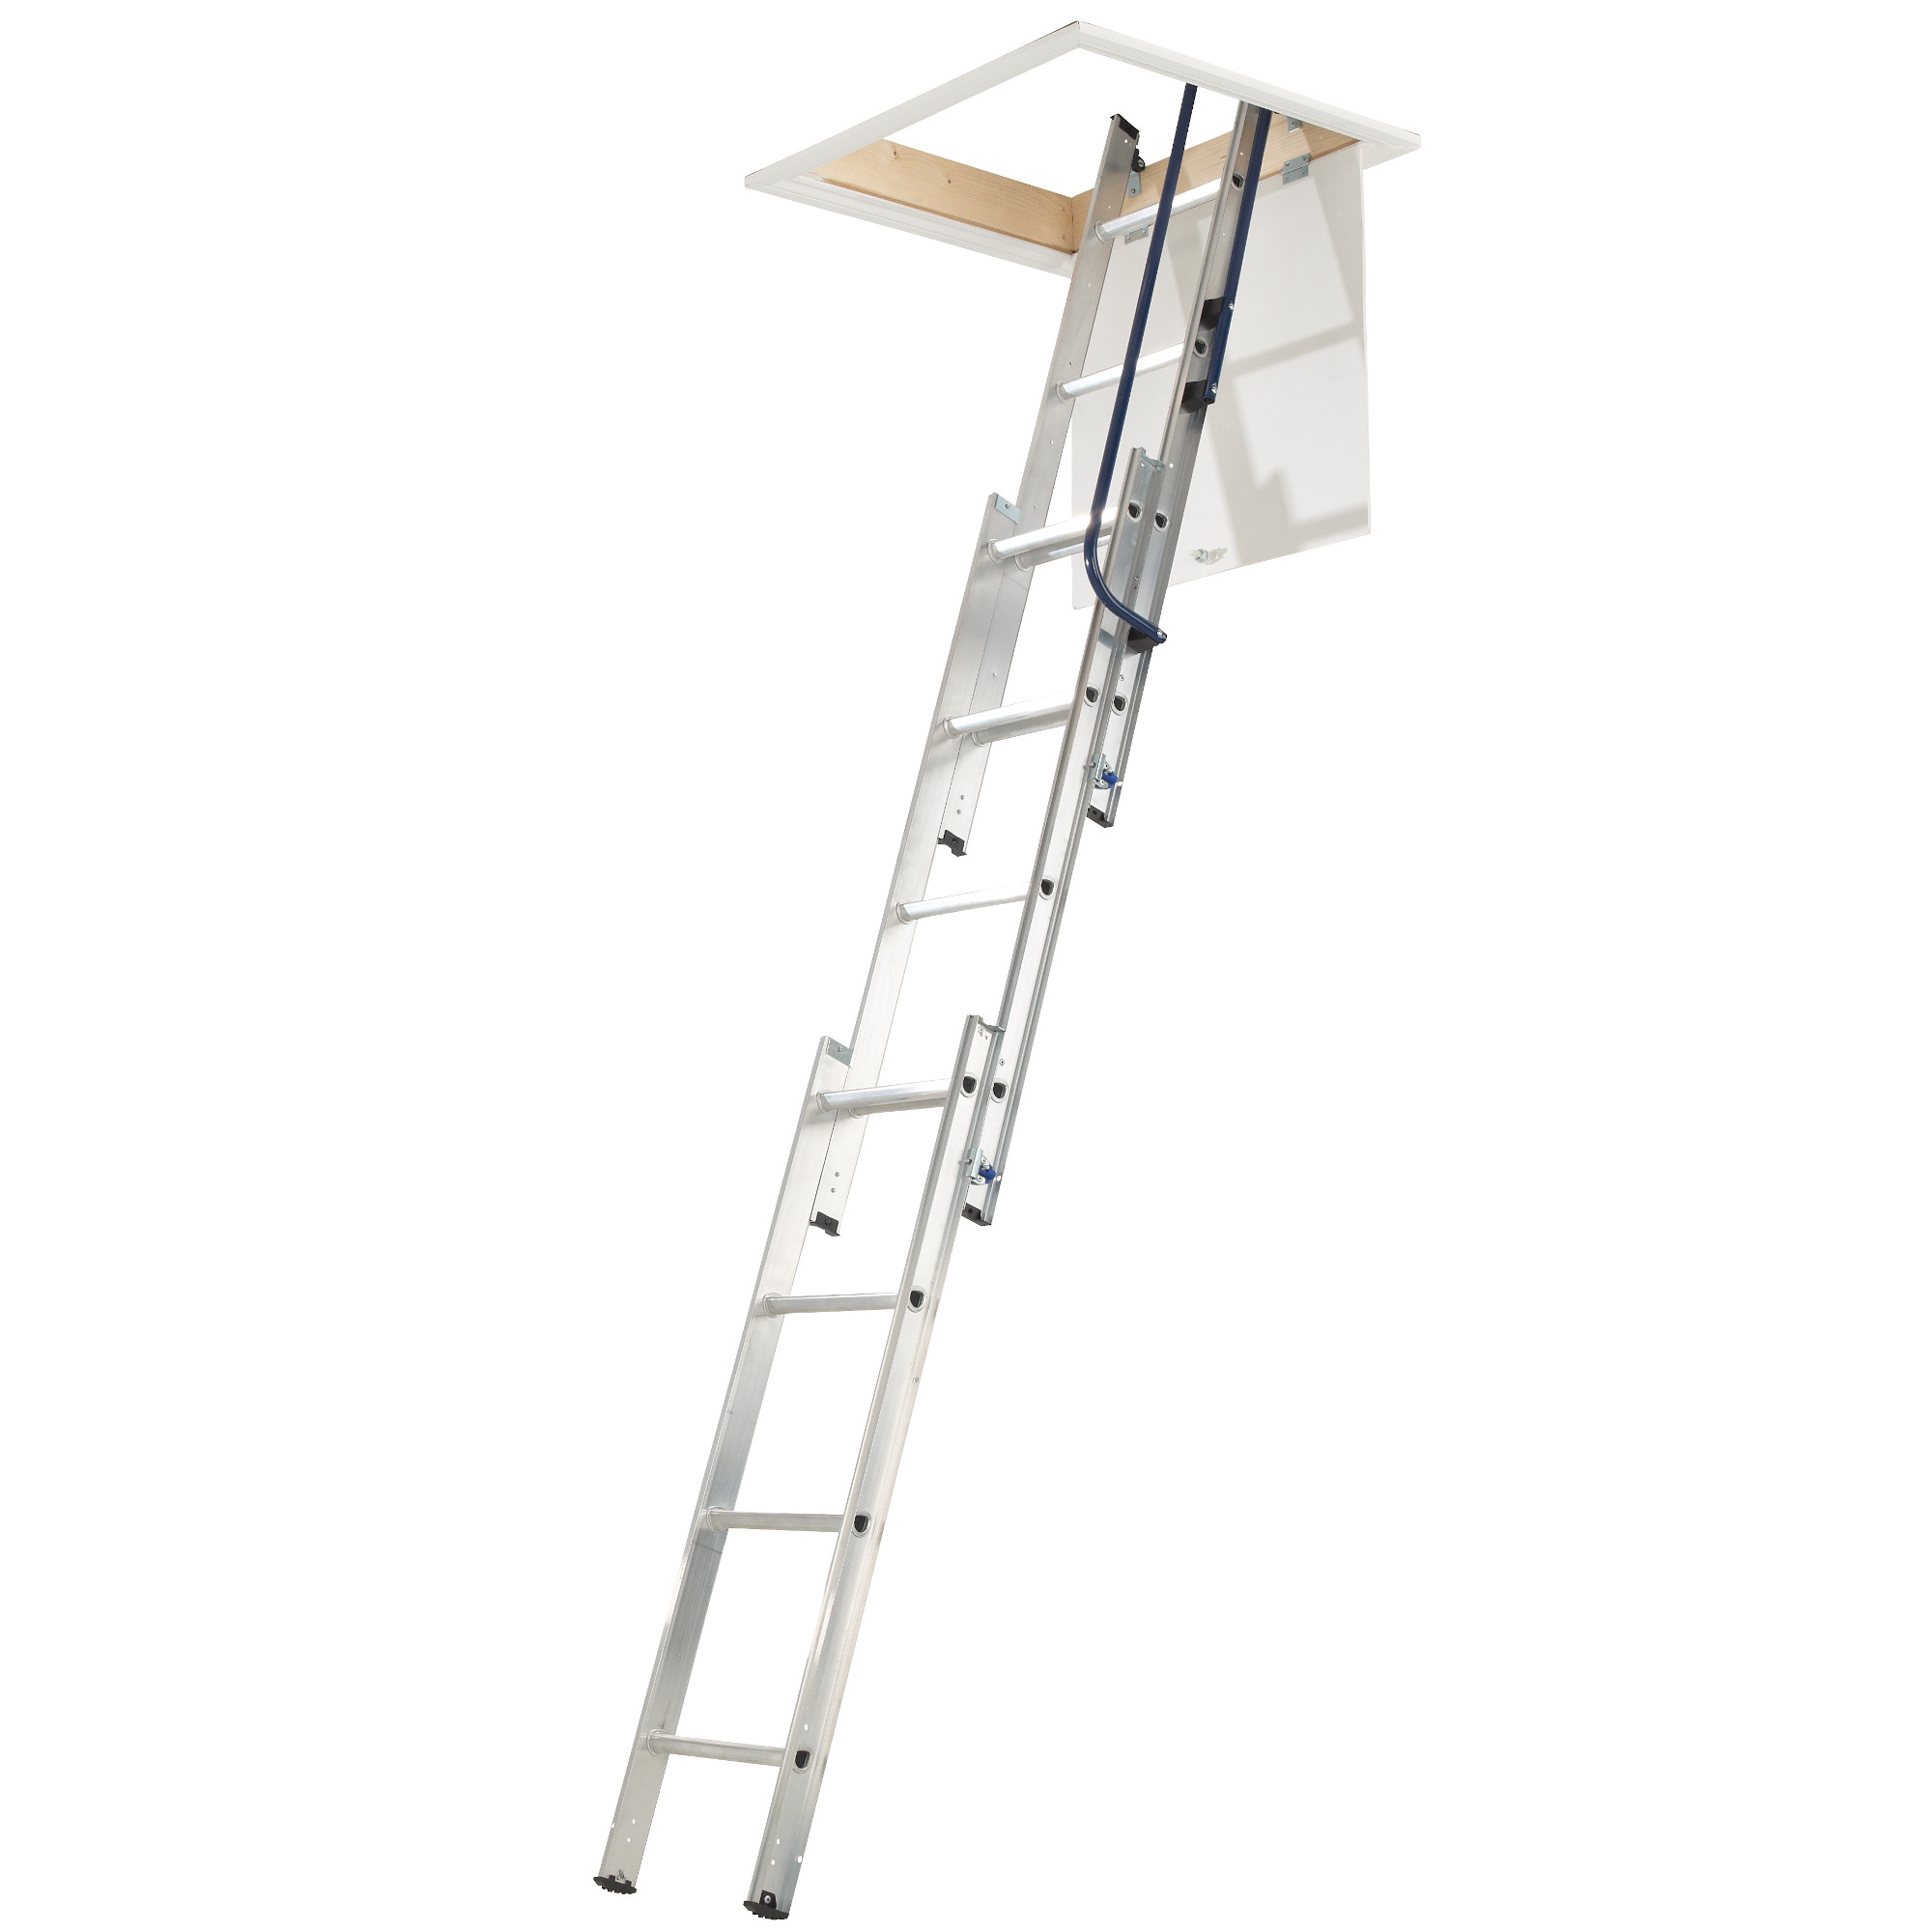 Werner 3 Section Loft Ladder Easy Stow